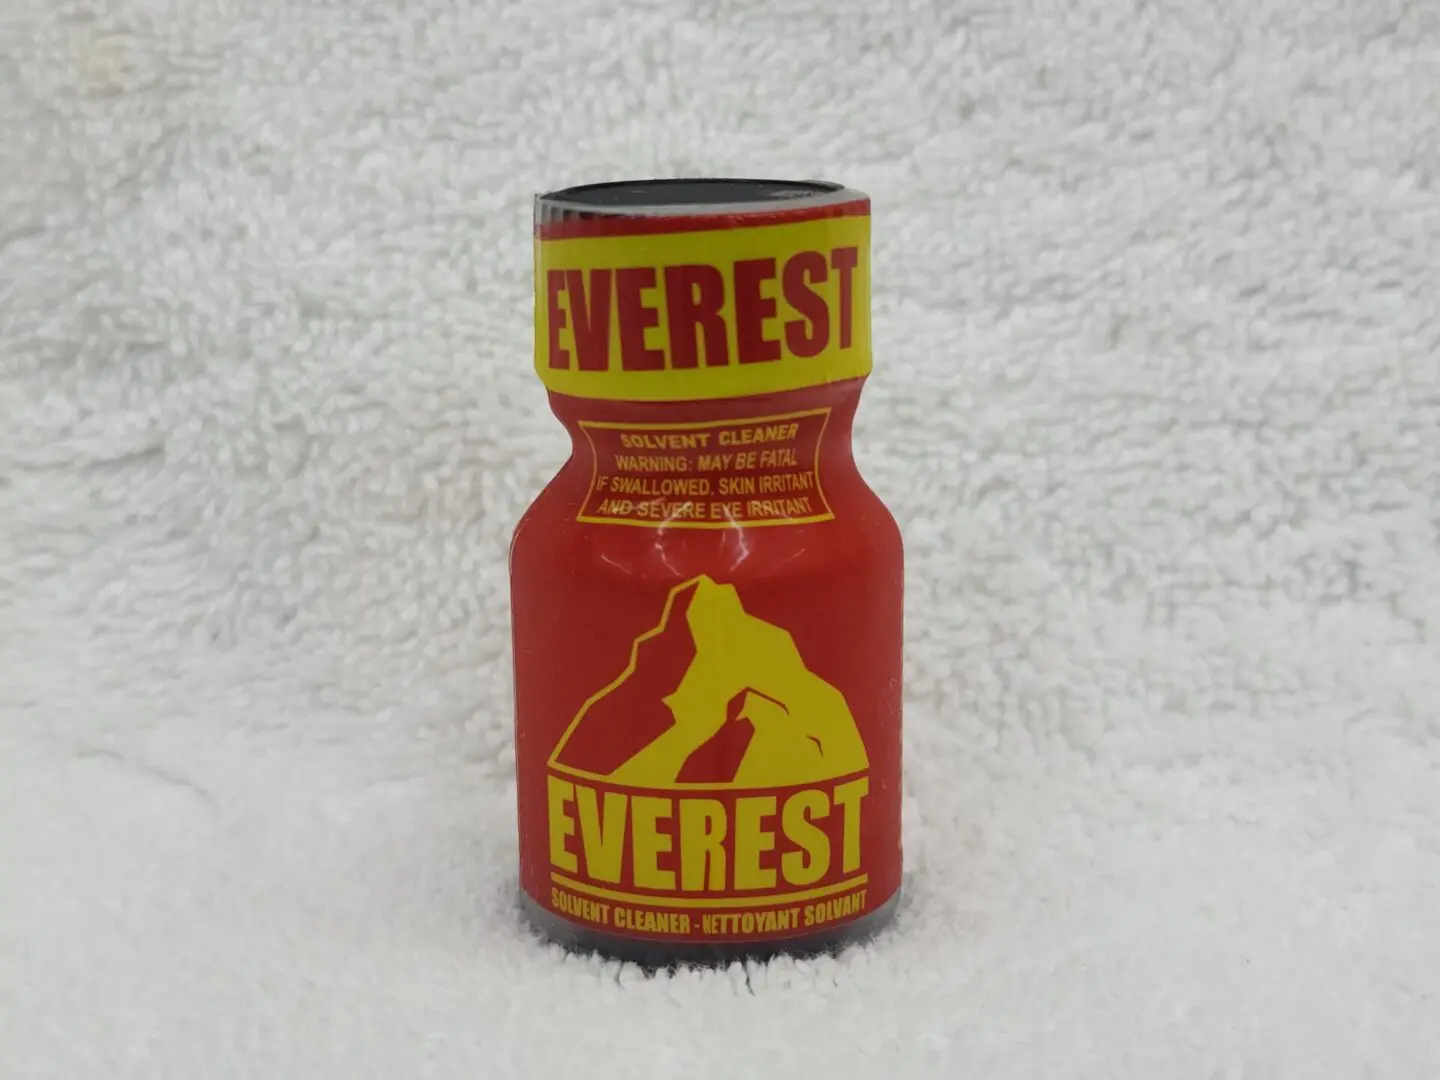 A red and yellow bottle of poppers sitting on top of a white blanket.